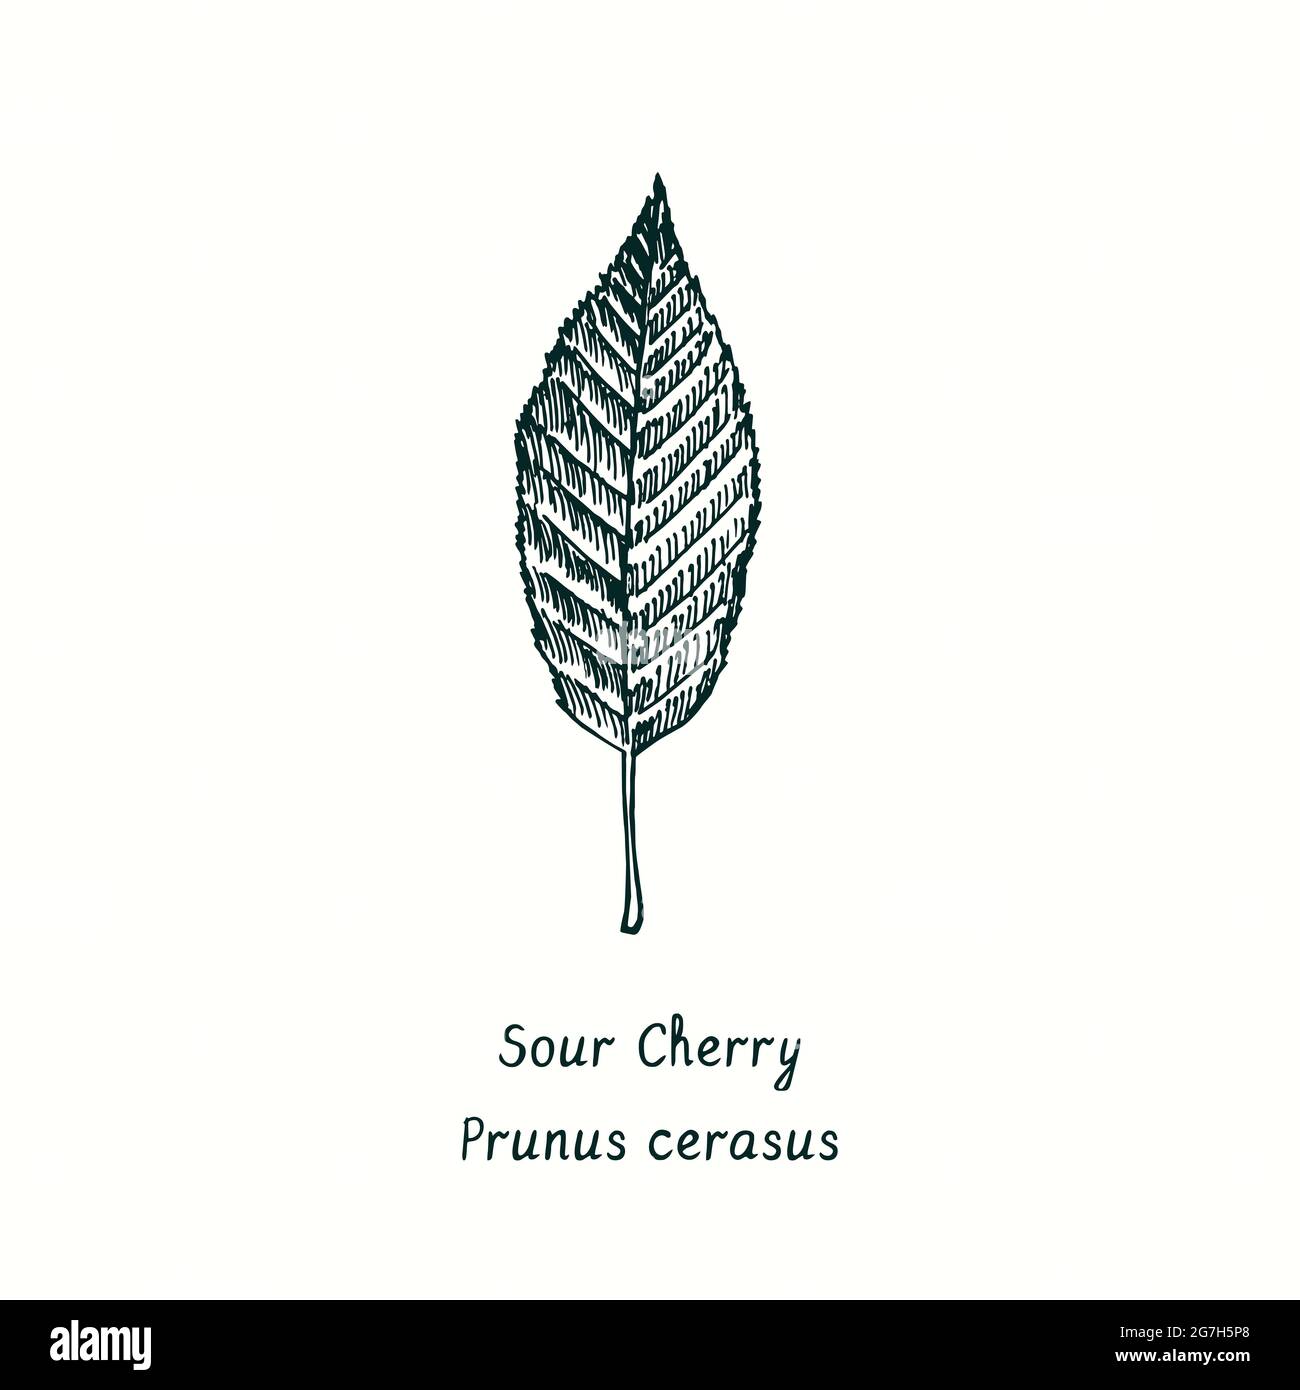 Sour cherry (Prunus cerasus) leaf. Ink black and white doodle drawing in woodcut style. Stock Photo